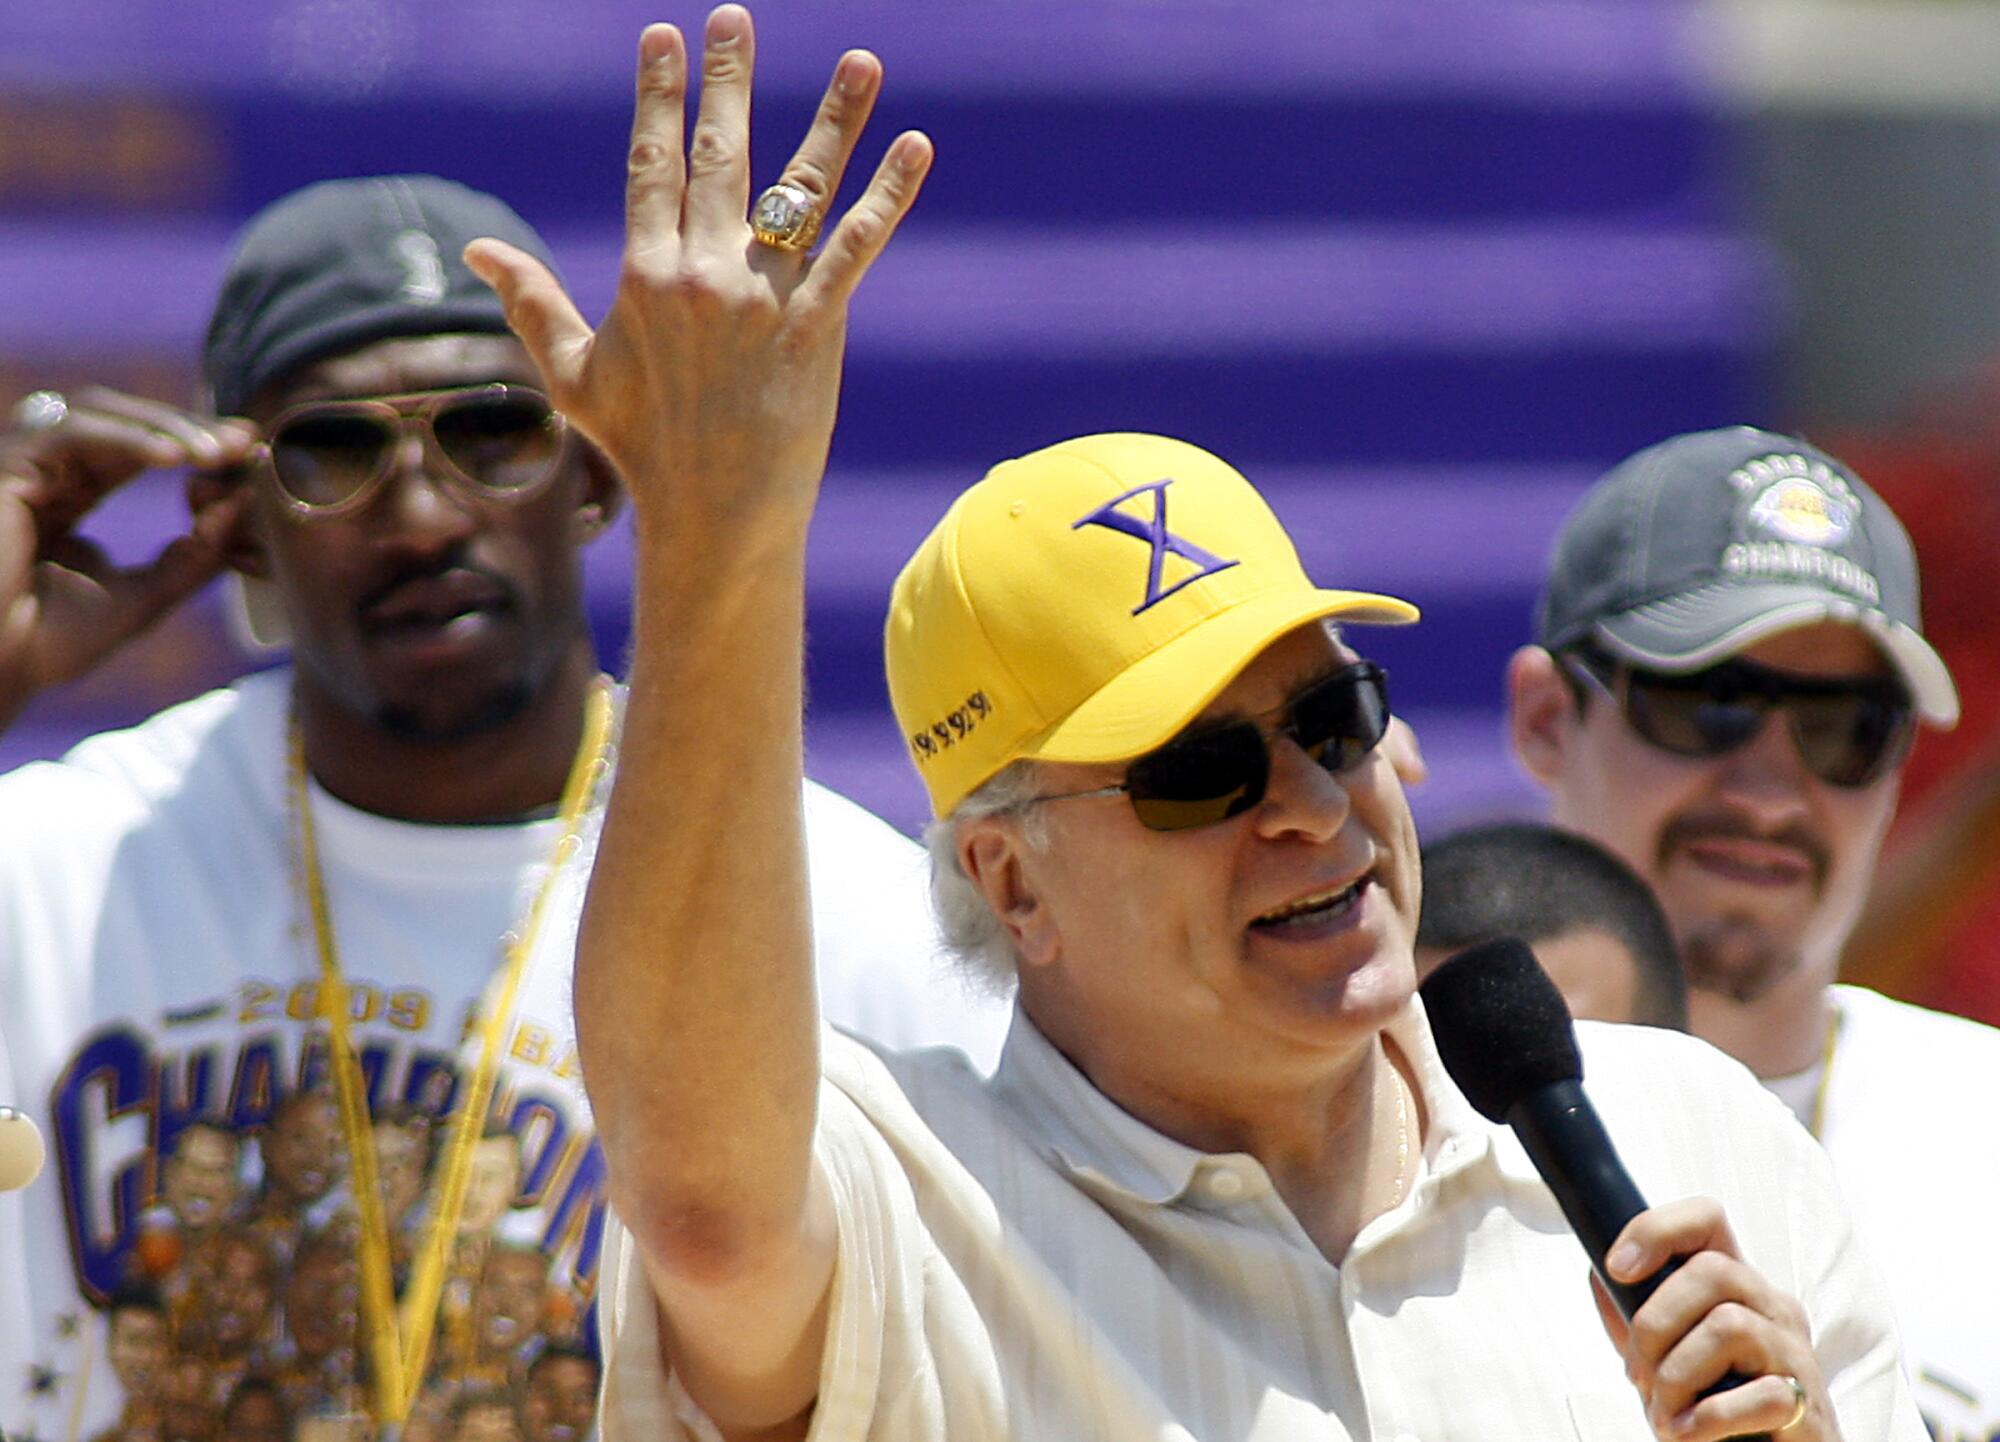 Lakers coach Phil Jackson shows off one of his NBA championship rings during the Lakers' 2009 NBA title celebration.